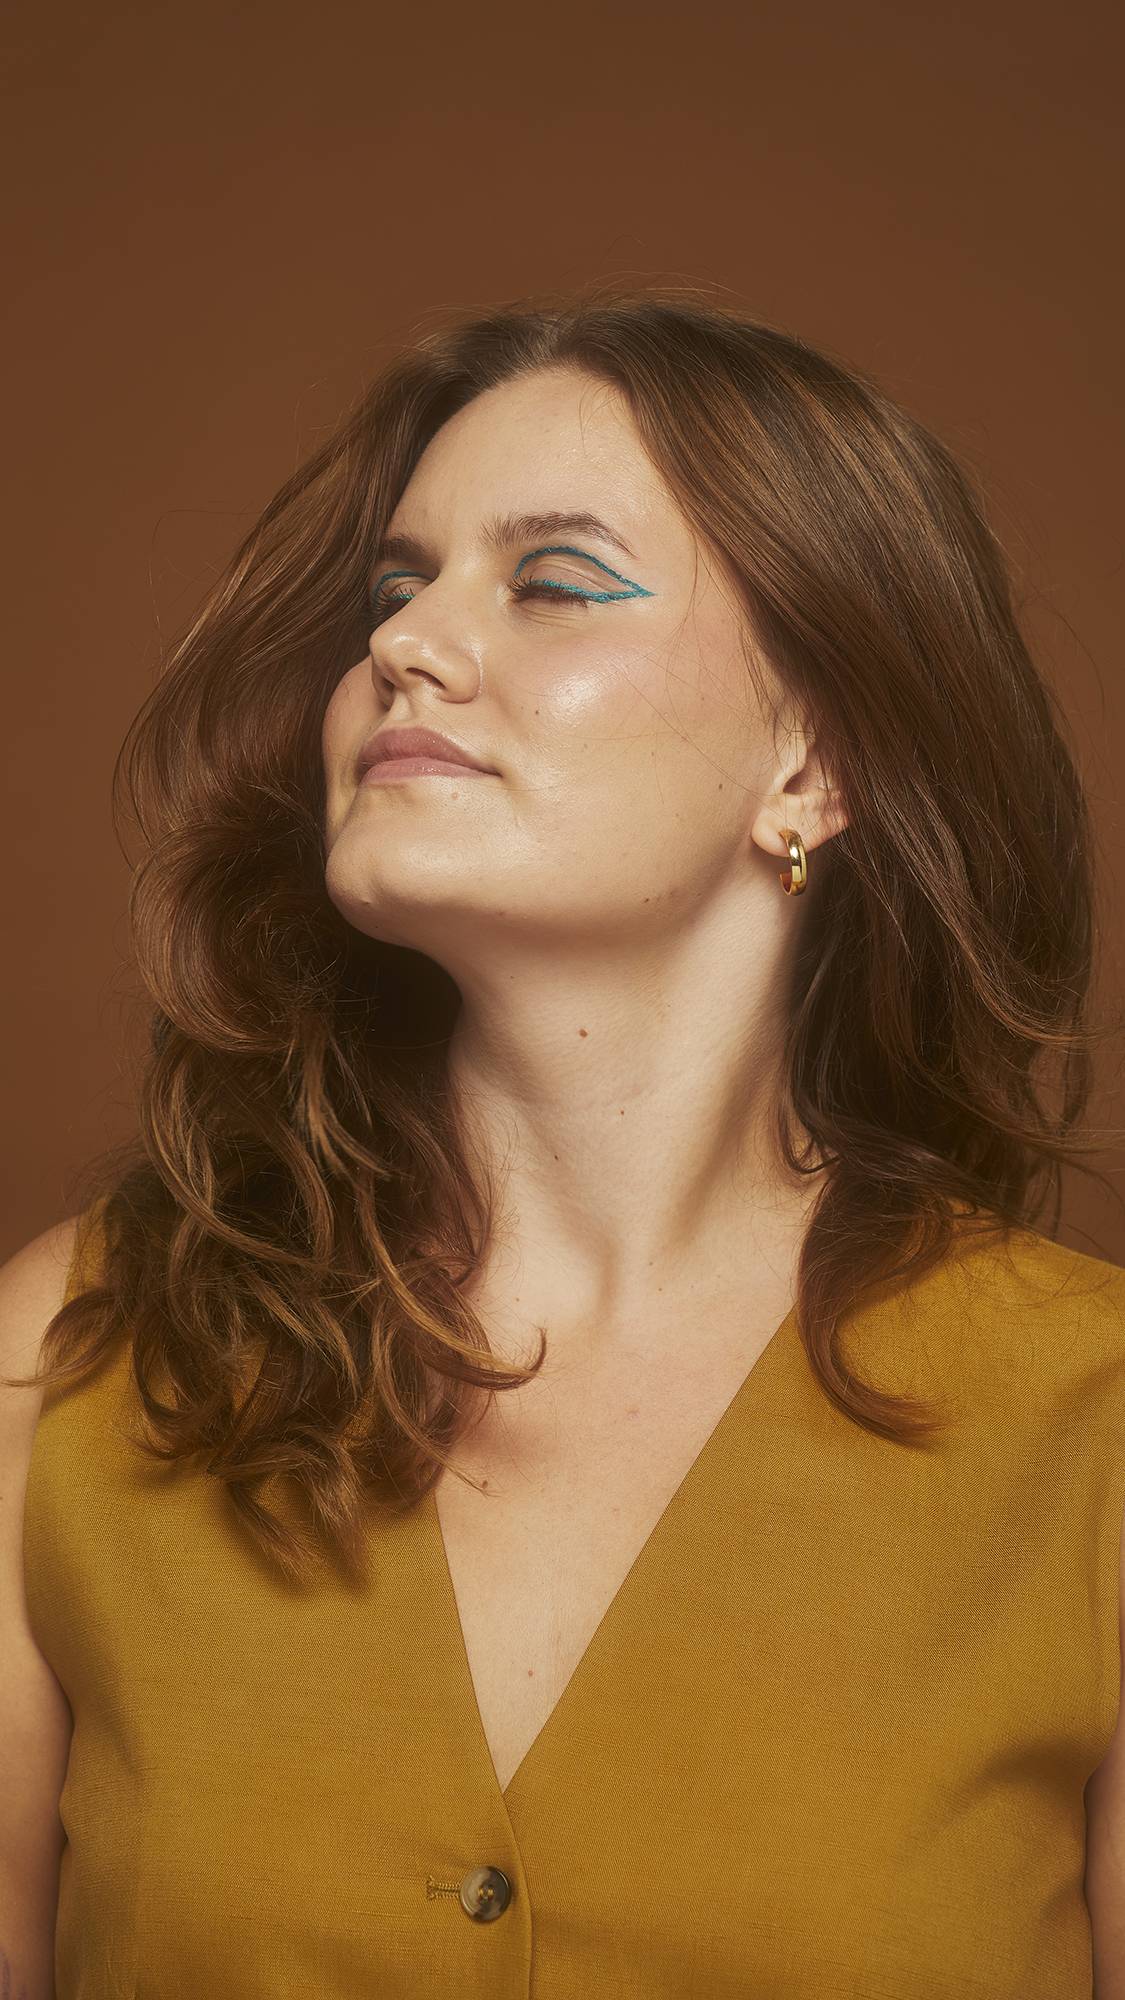 Model wears bold teal eyeliner showing healthy, thick, chestnut hair on an earth-toned background.